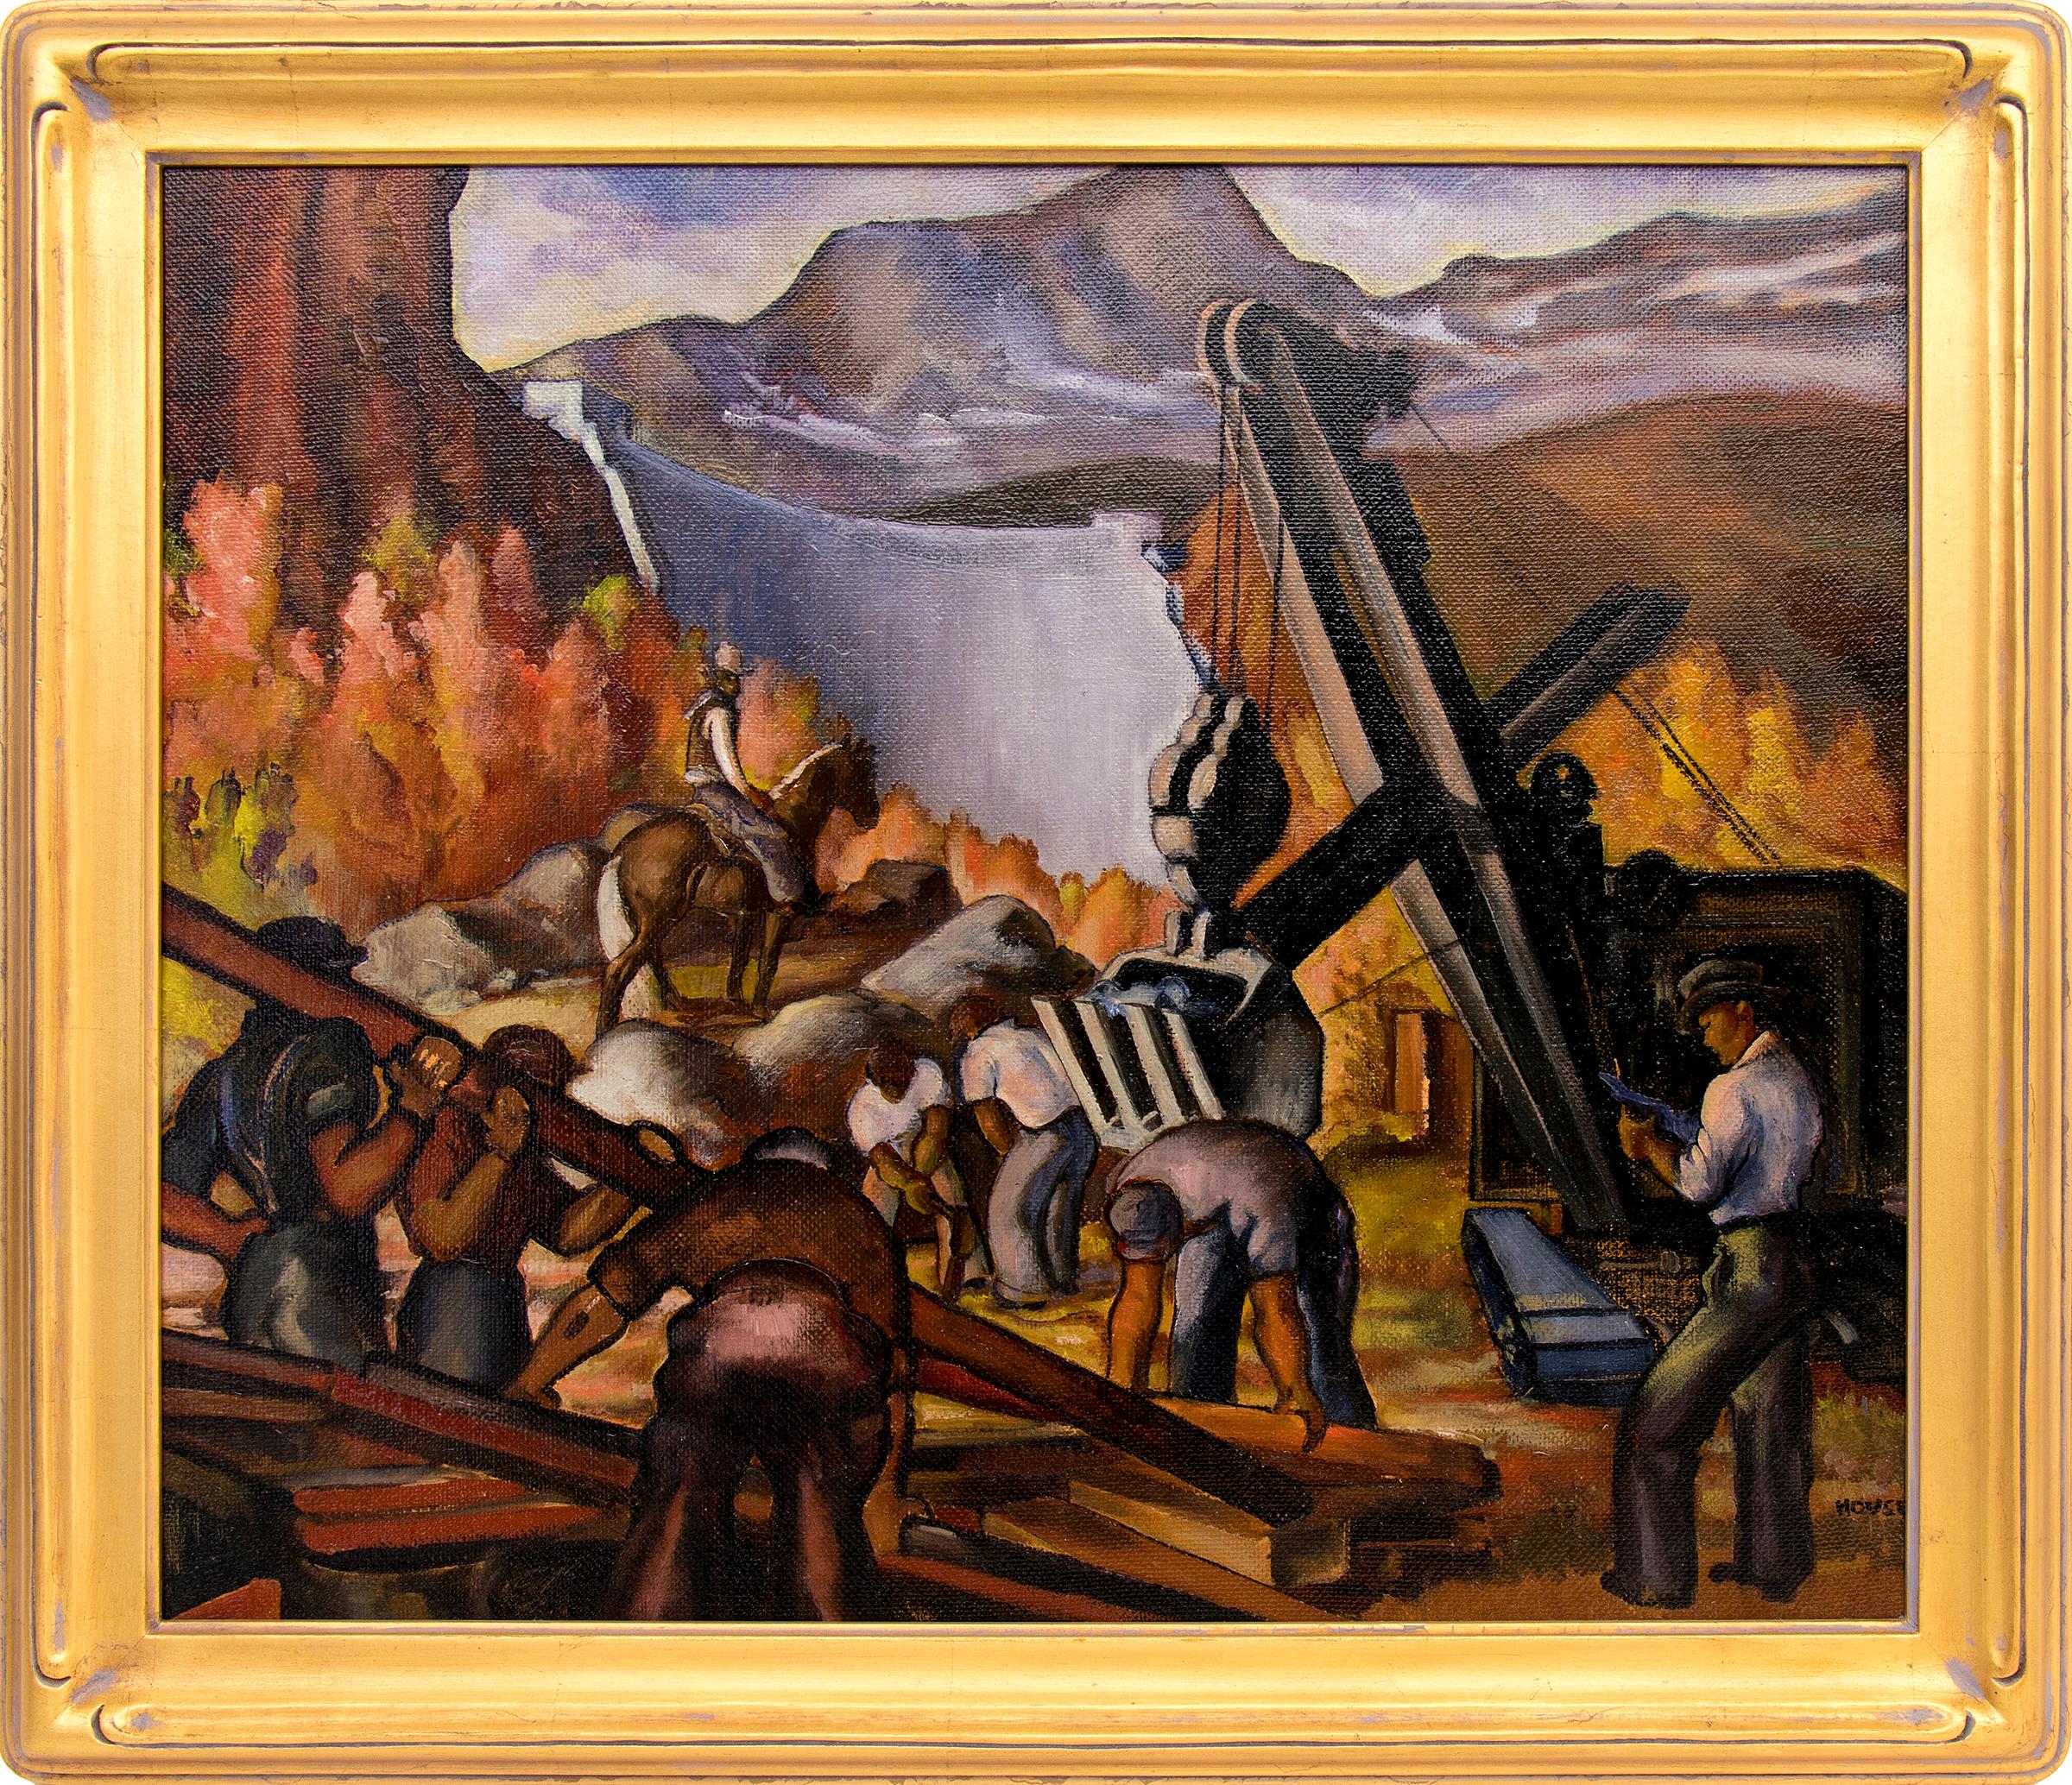 Beulah Beardsley Landscape Painting - Dam Construction in the Mountains Colorado, 1930s WPA Era American Scene Painting